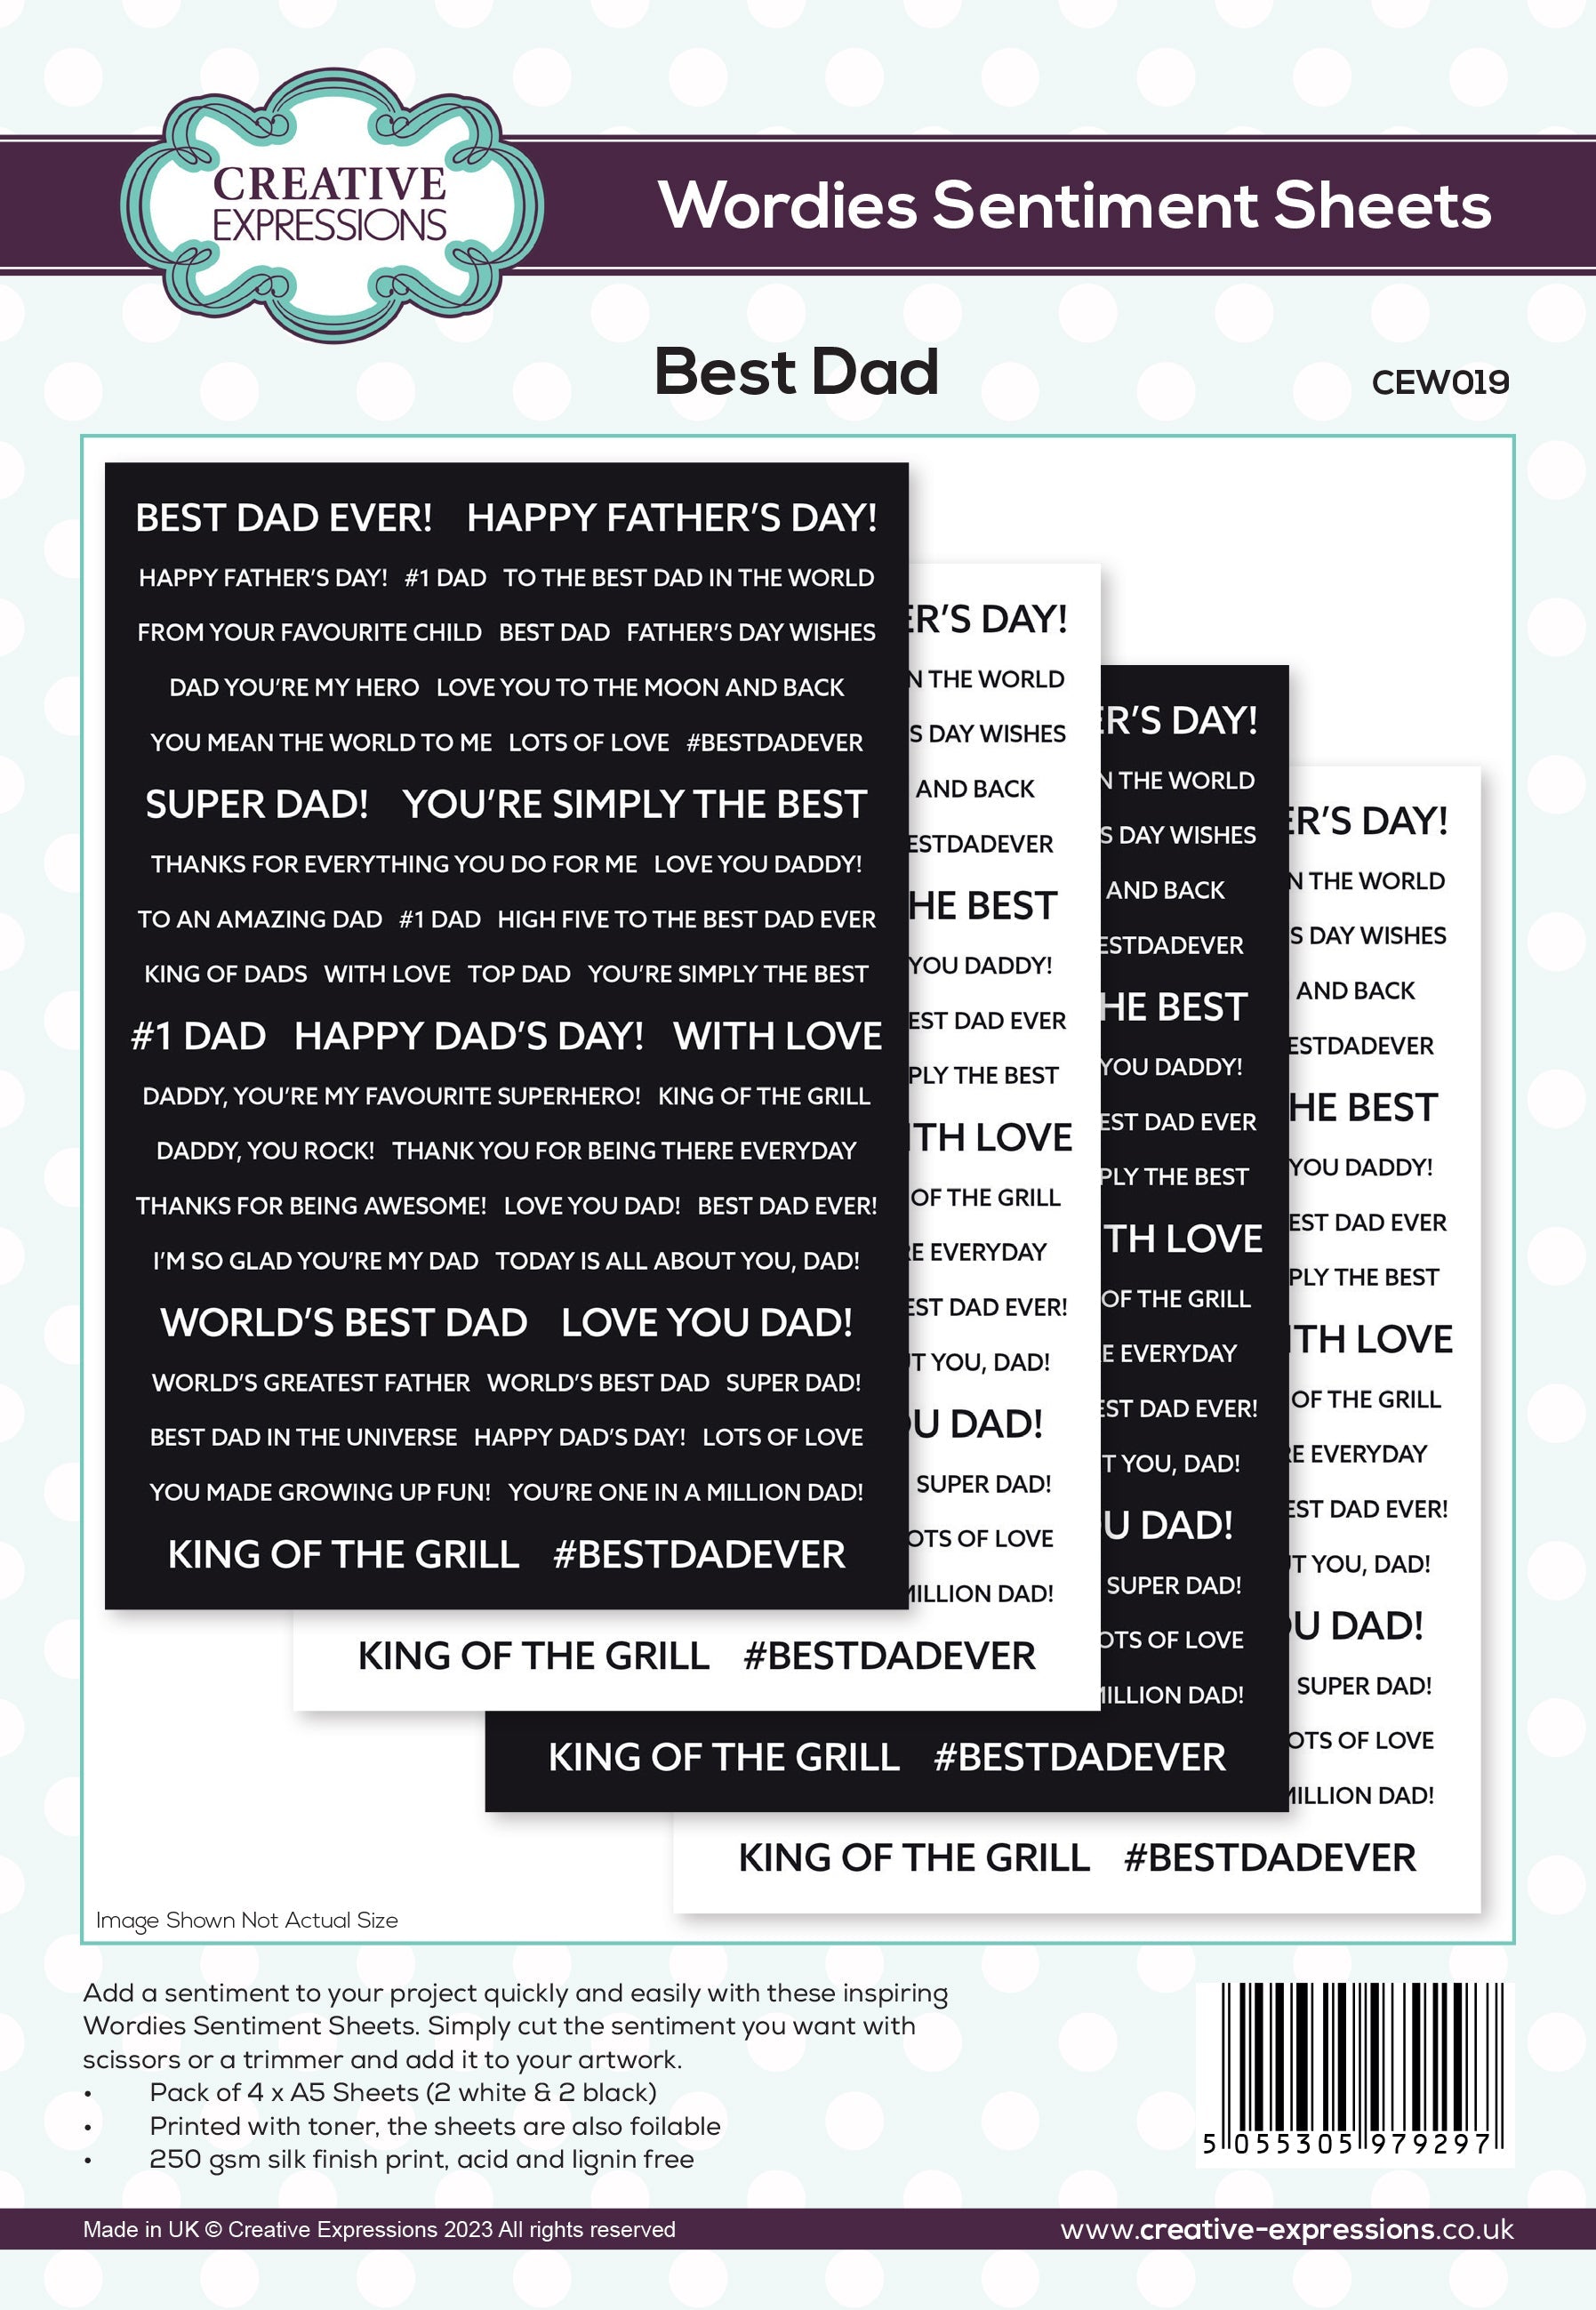 Creative Expressions Wordies Sentiment Sheets Best Dad Pk 4 6 in x 8 in